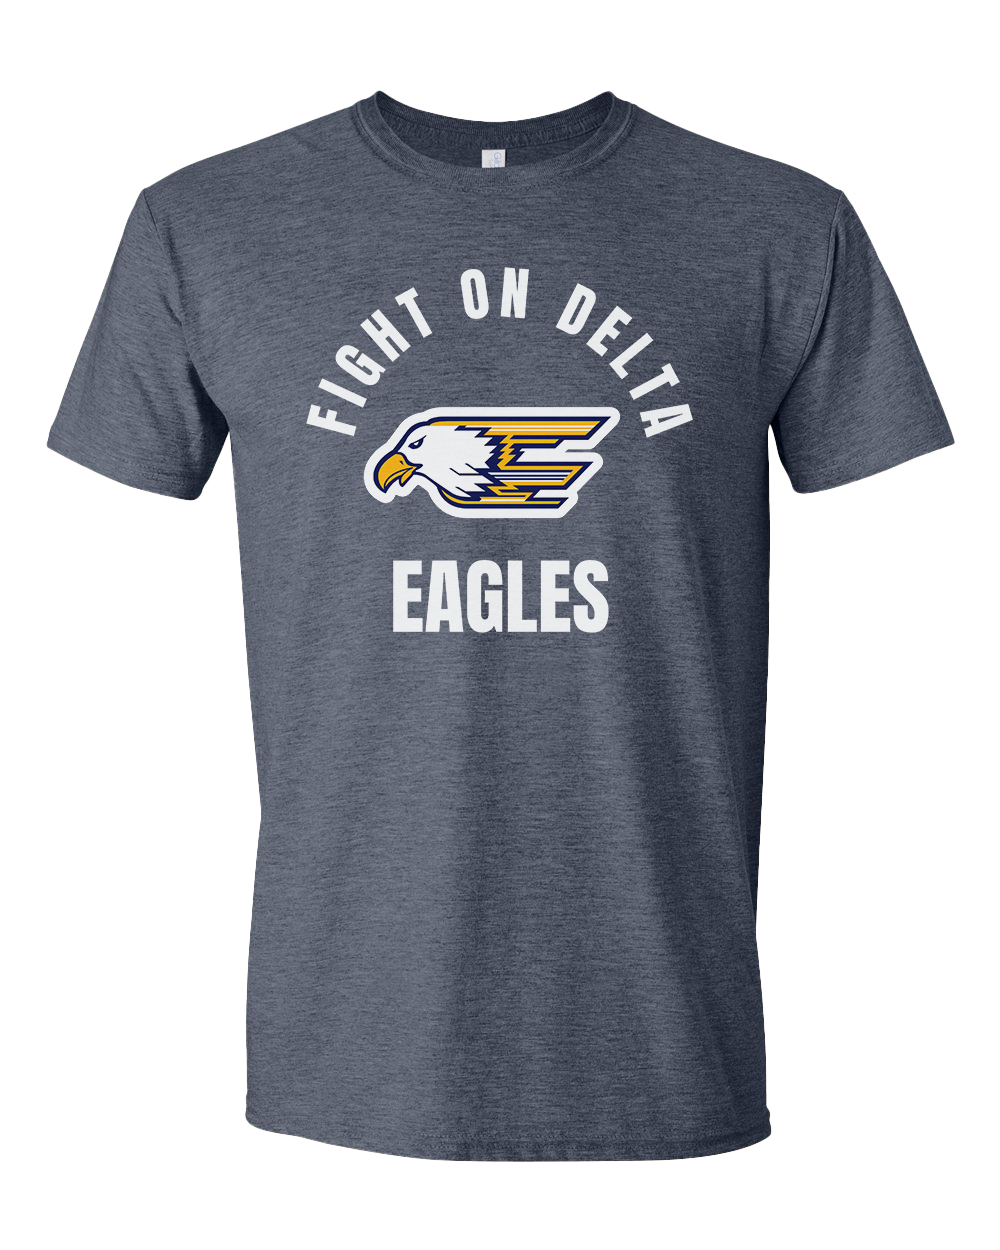 Delta Eagles Fight Song Tshirt - Various Colors